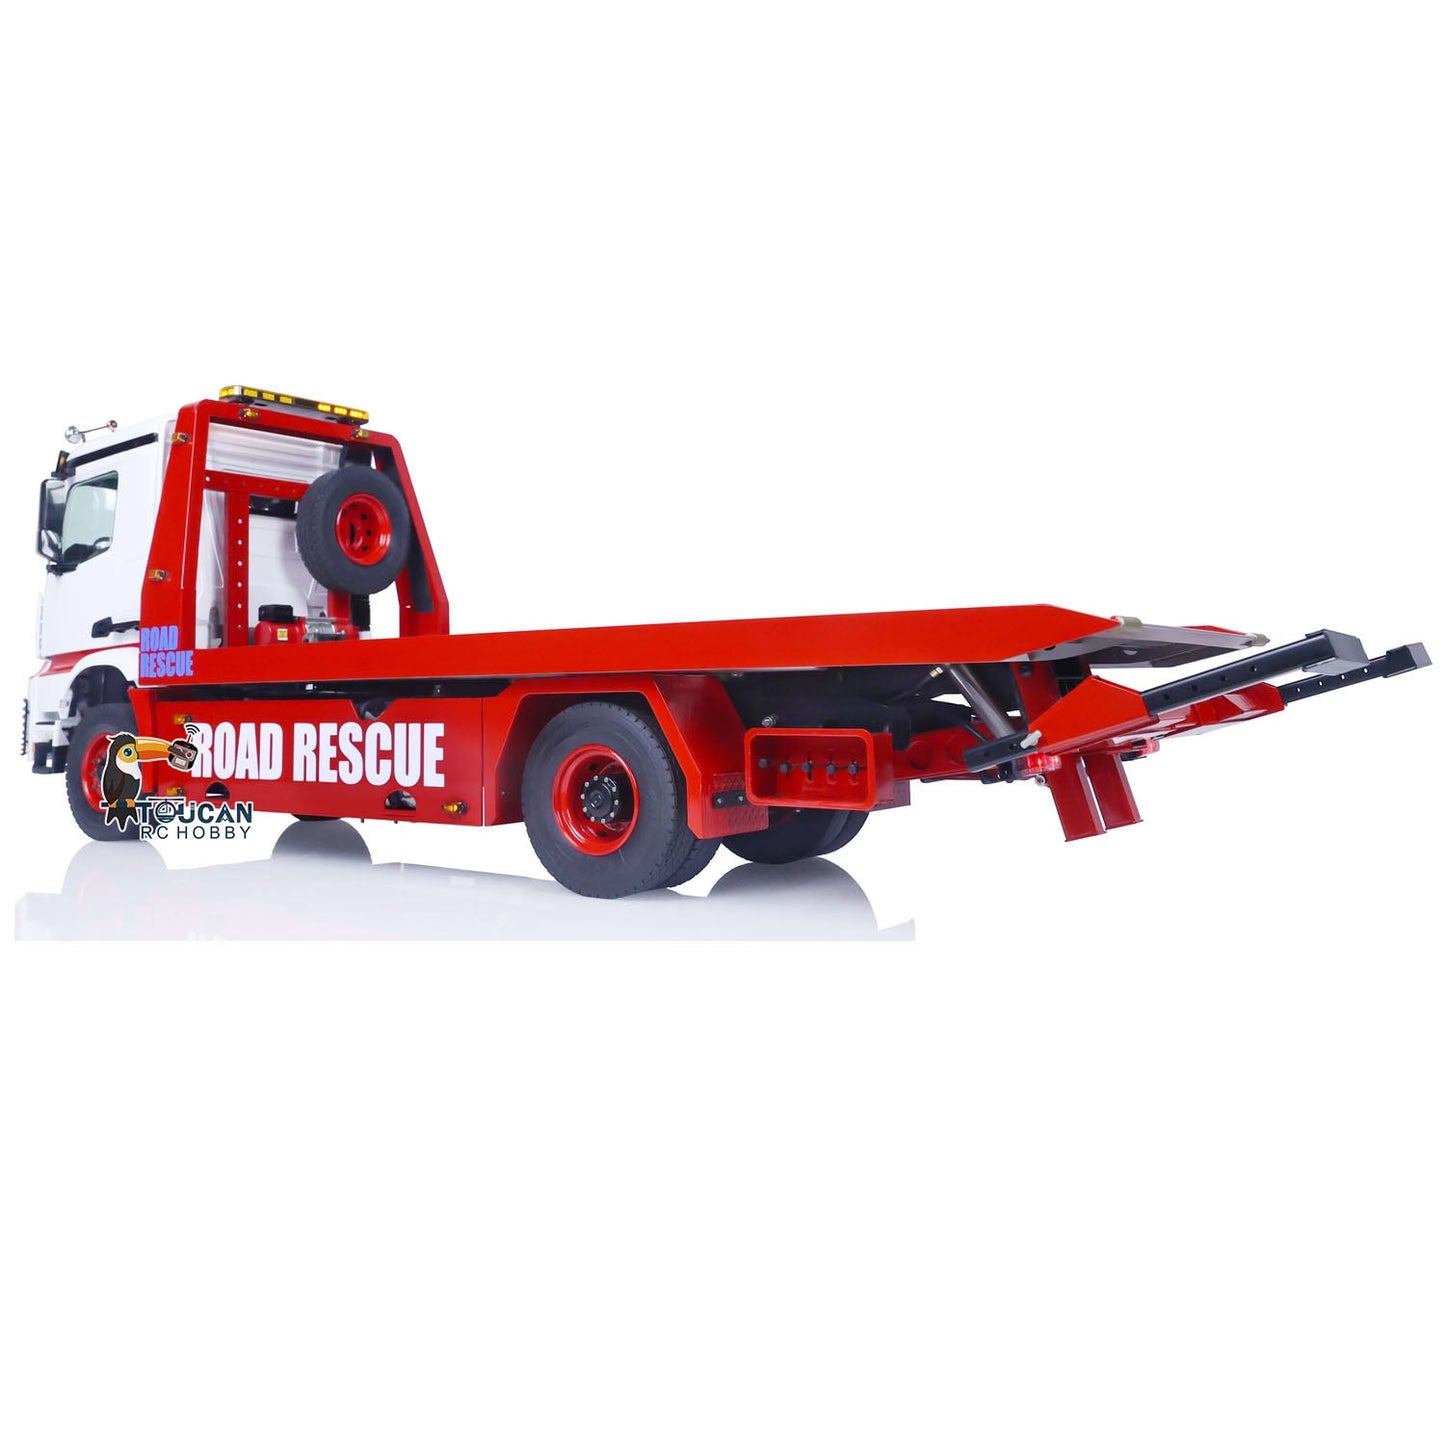 IN STOCK JDModel 196 1/14 RC Hydraulic Tow Truck 4X4 Flatbed Wrecker Recovery Vehicle